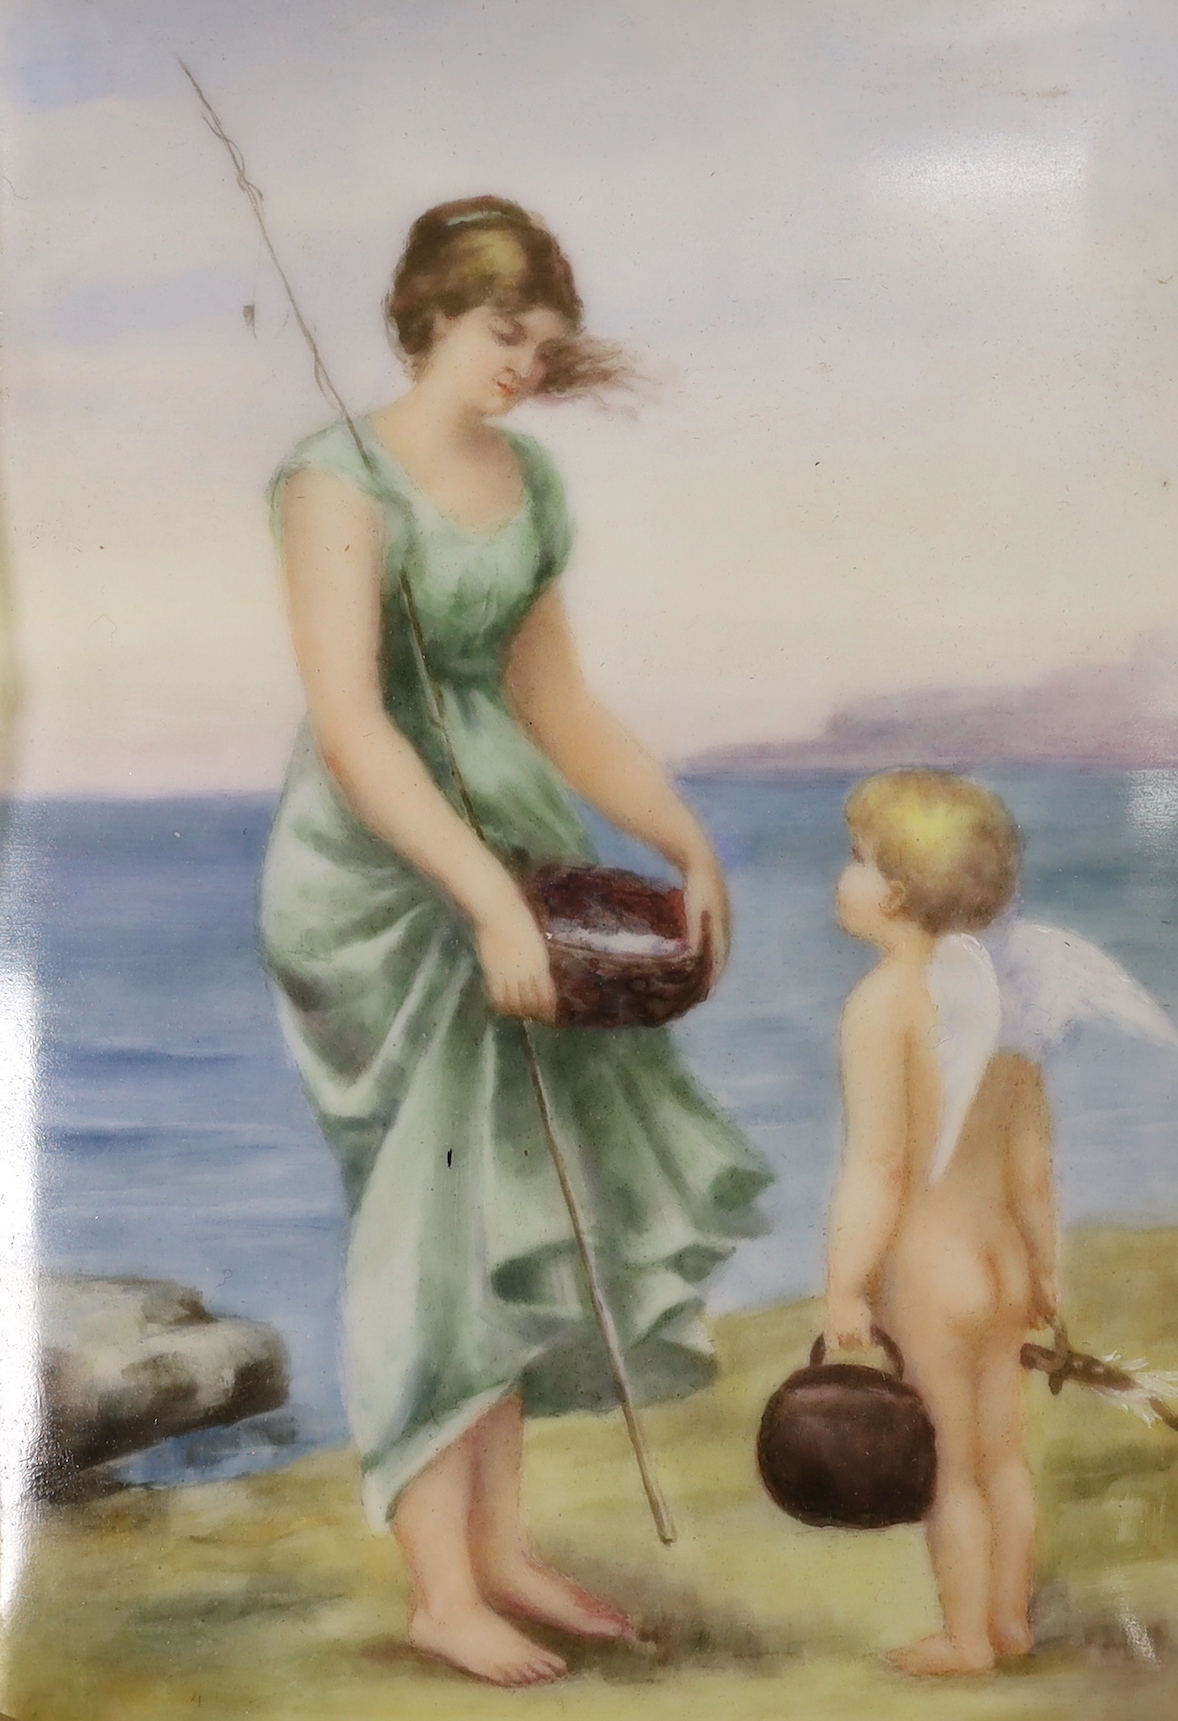 A Continental porcelain plaque painted with a woman and putti on a beach, 17 x 12cm